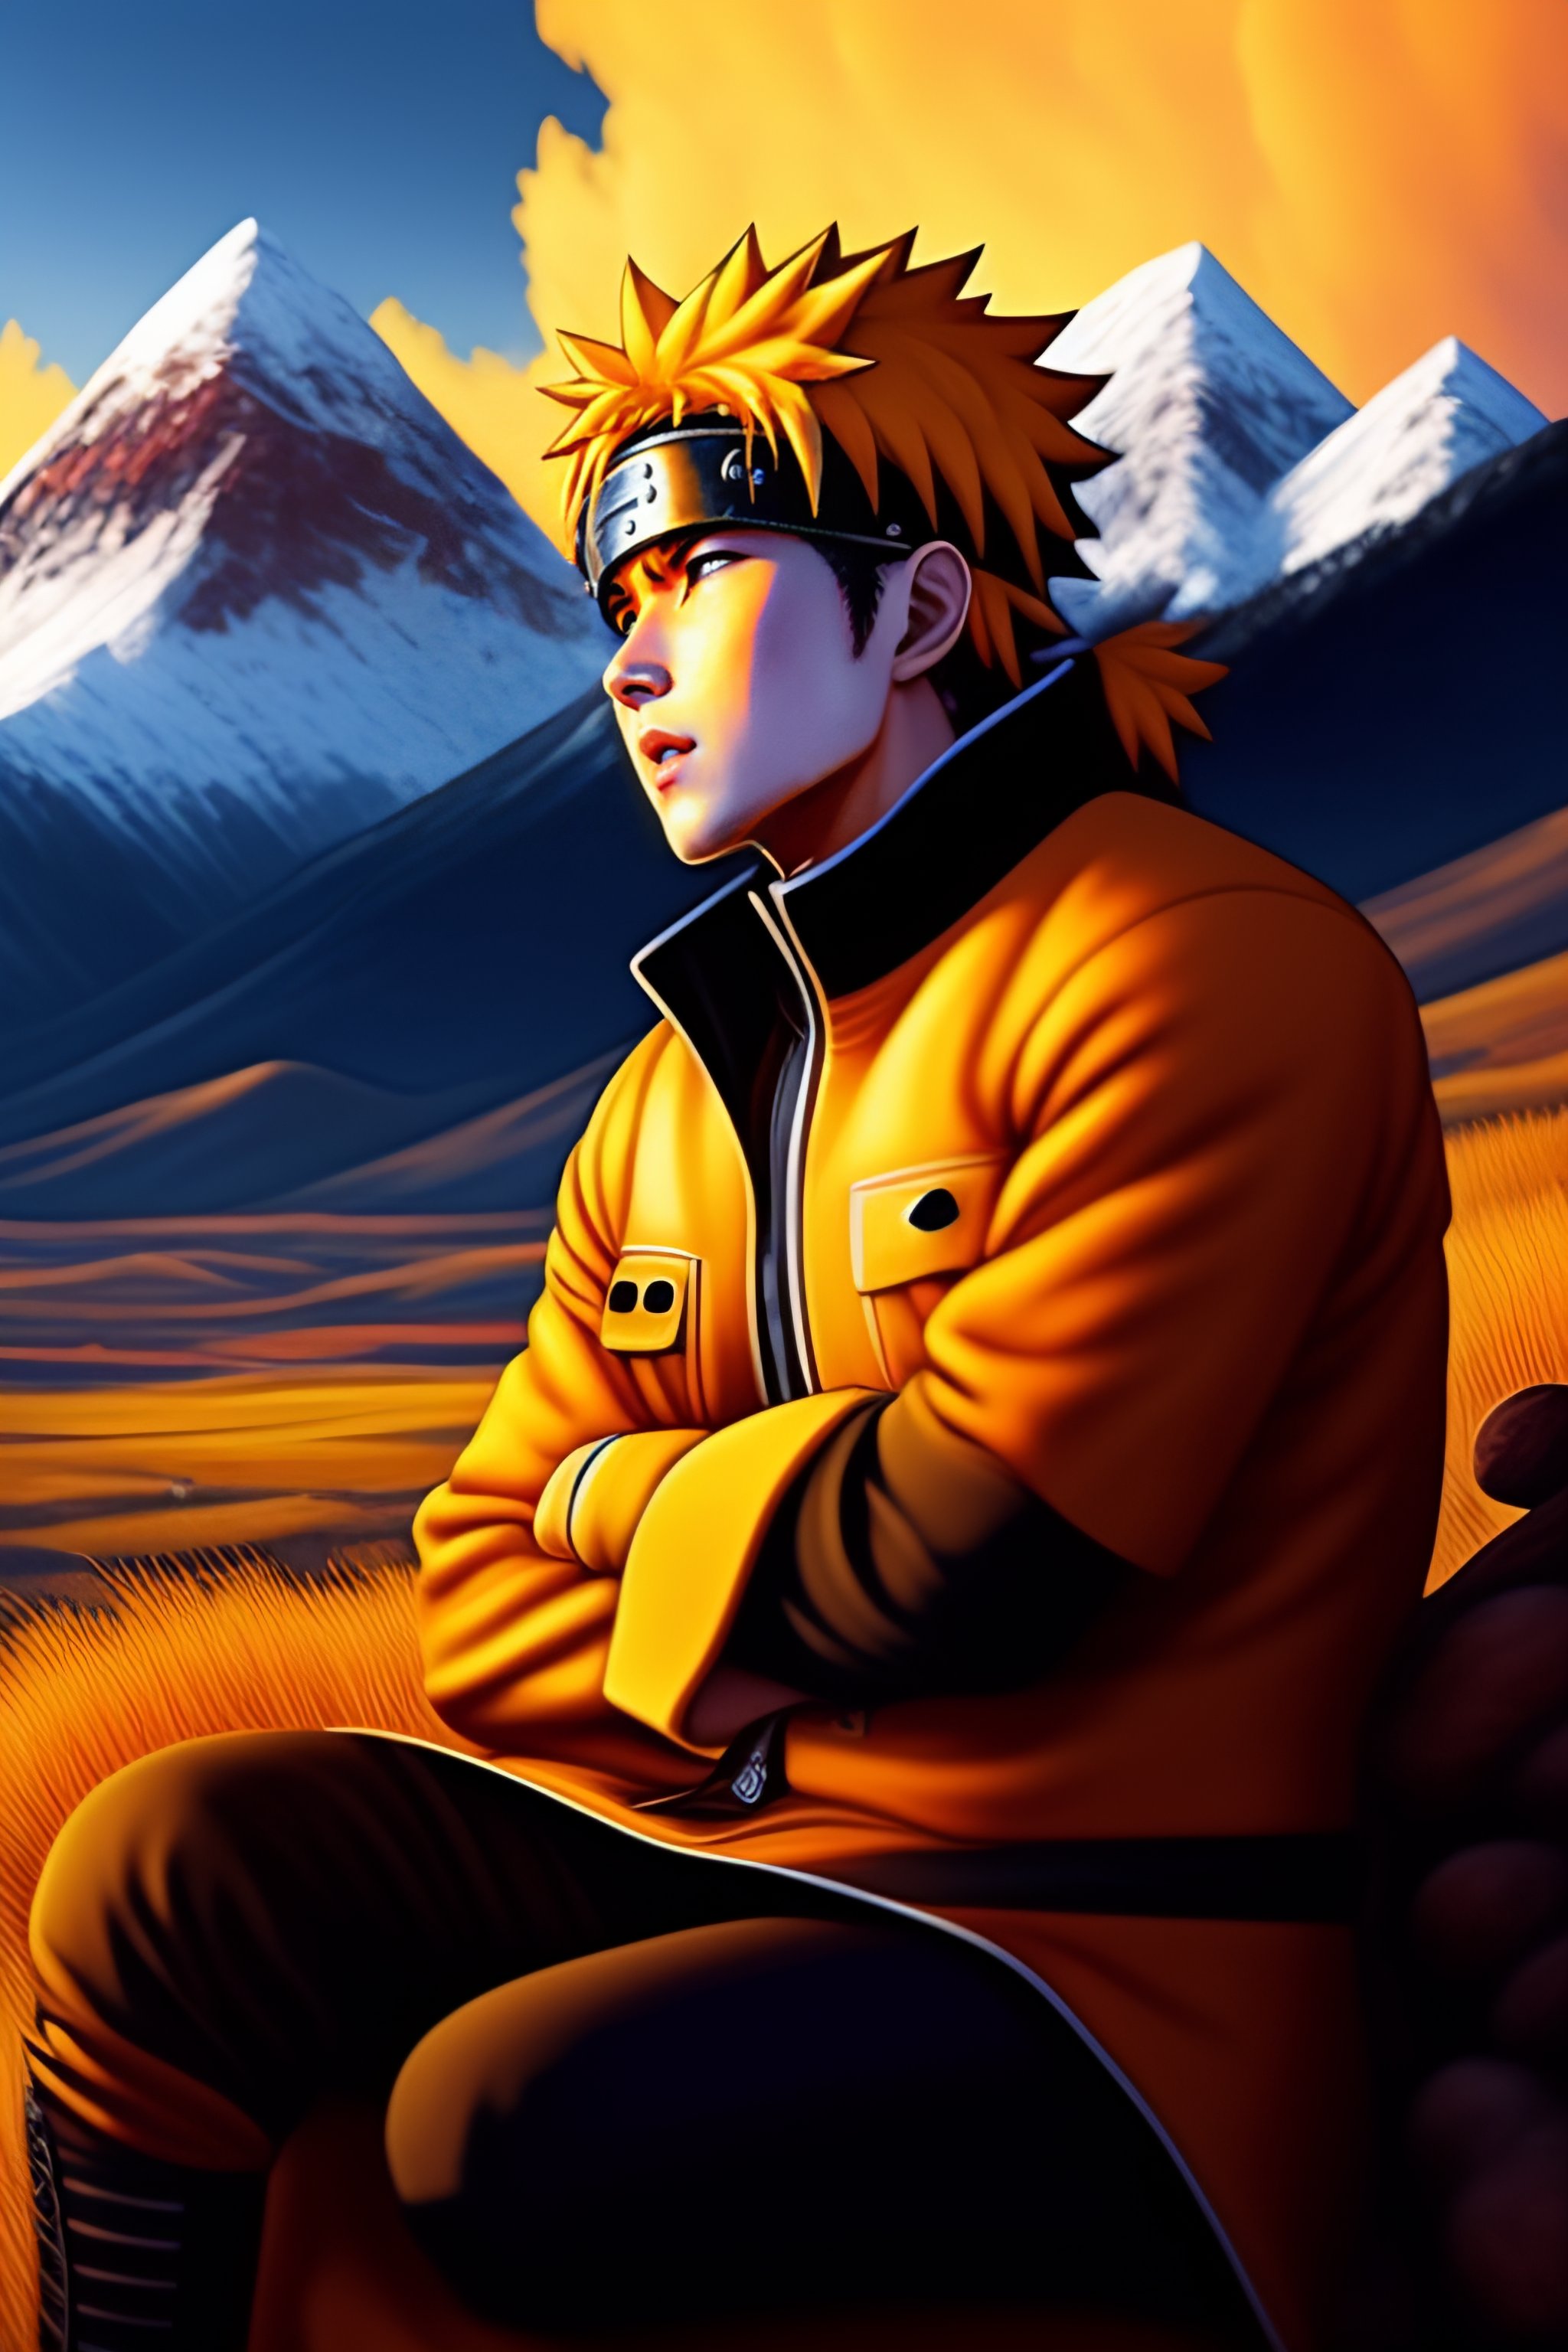 Unveiling the Majestic Portrait of Naruto Wallpaper Singing on a Mountain / Naruto Wallpaper